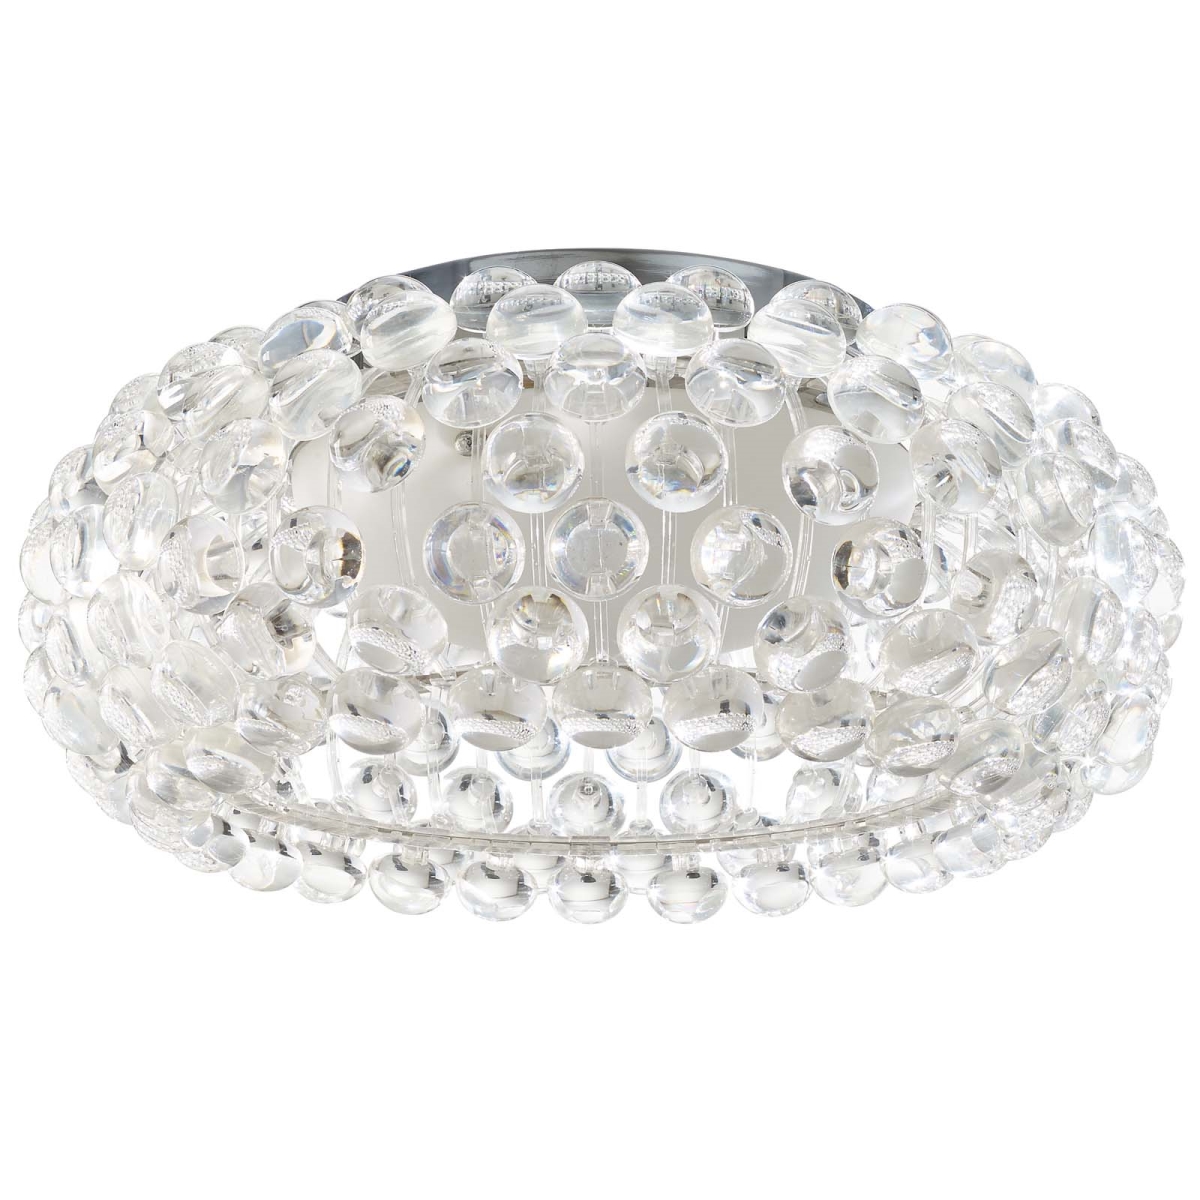 Eei-2913 8.5 X 19 In. 19 In. Halo Acrylic Ceiling Fixture - Clear